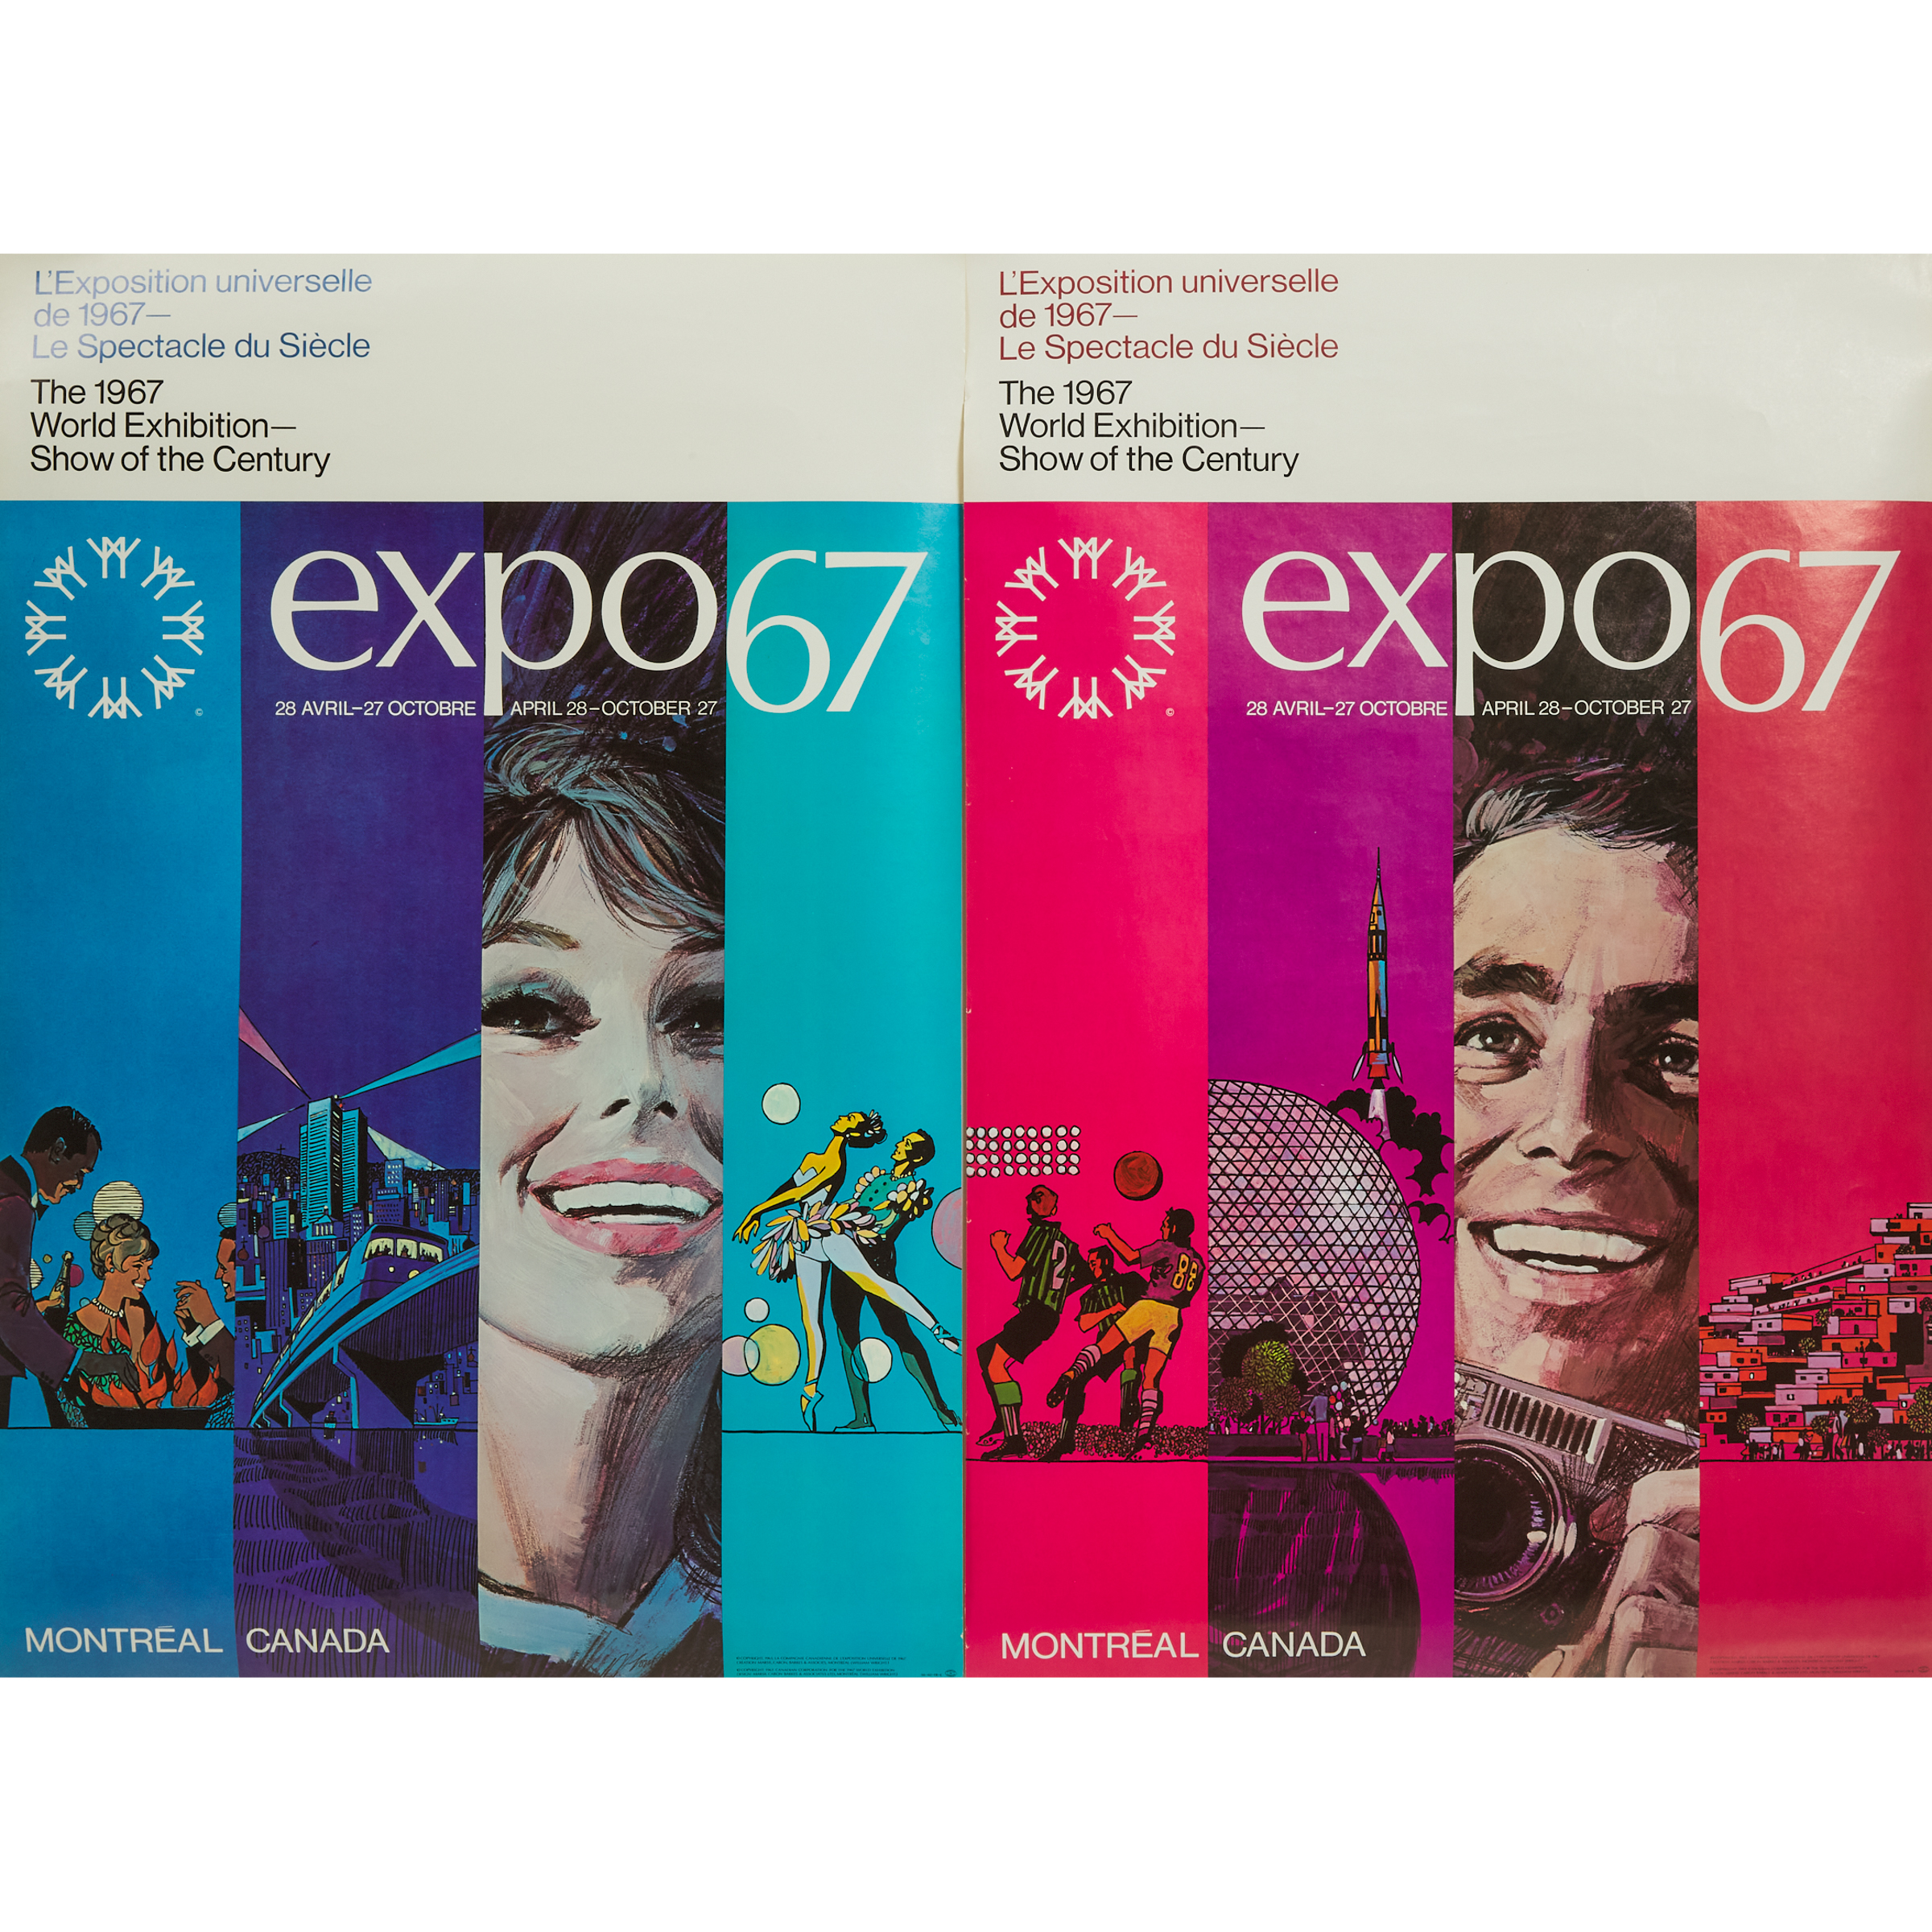 Pair of Expo '67 Posters, 1967